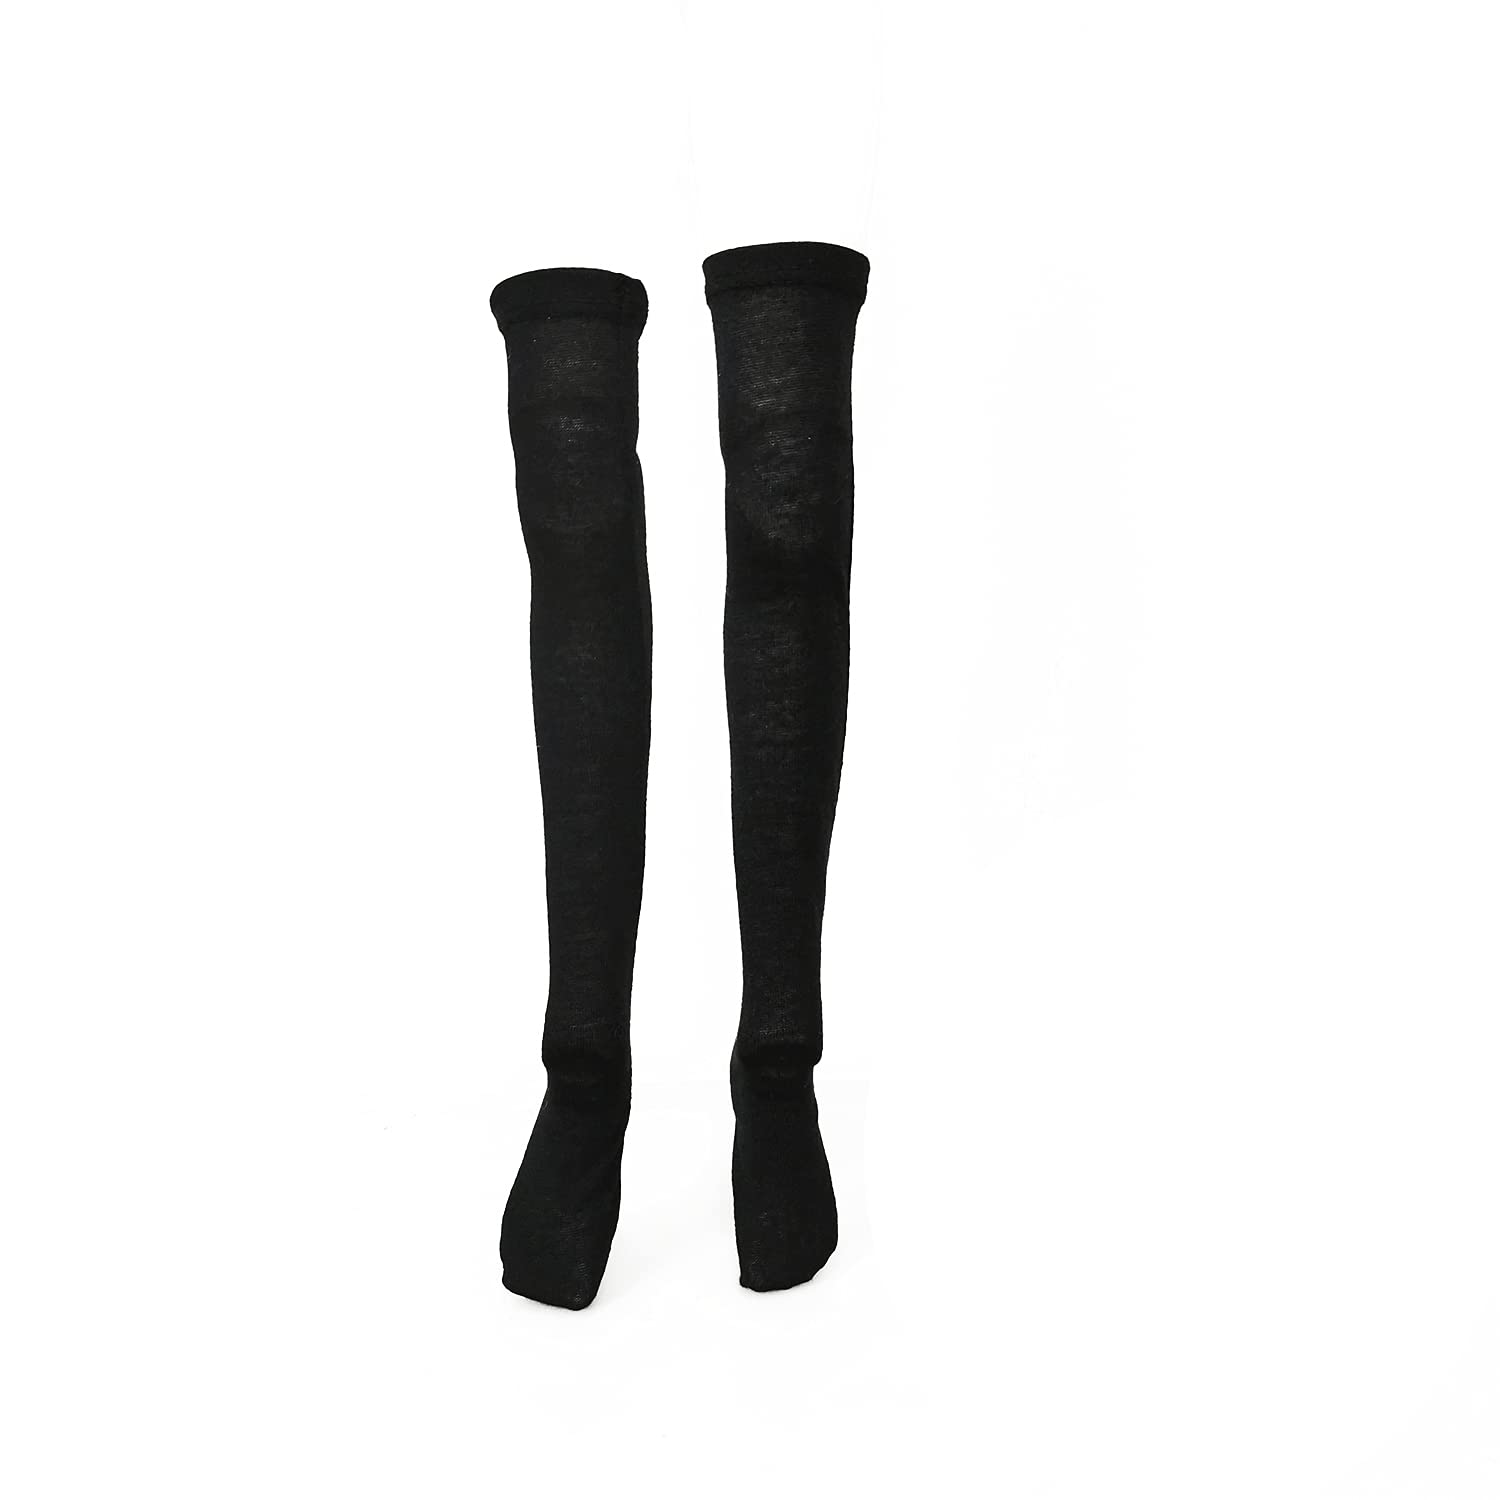 Proudoll 3 Pair Stockings Middle Tube Sock Fit for 1/3 BJD Doll 24inches 60cm SD Doll Ball Joints Dolls Accessories and Doll in Similar Size (Black)